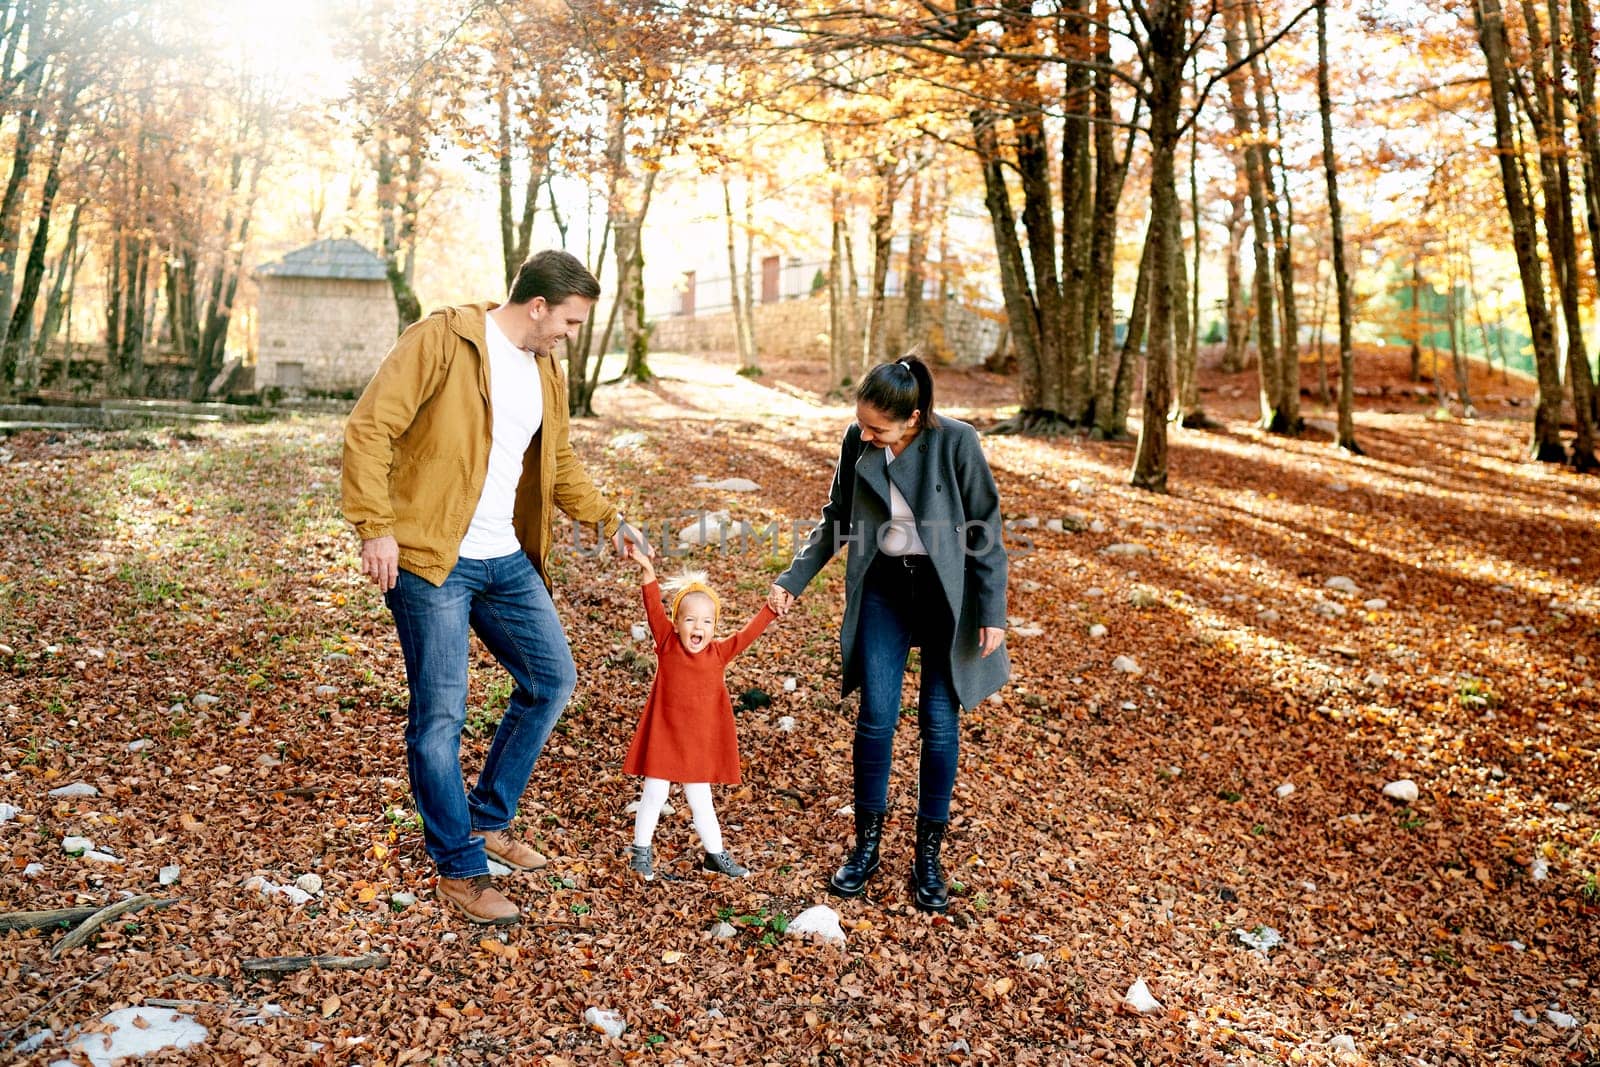 Little laughing girl stands on fallen leaves in the forest, holding hands with mom and dad. High quality photo